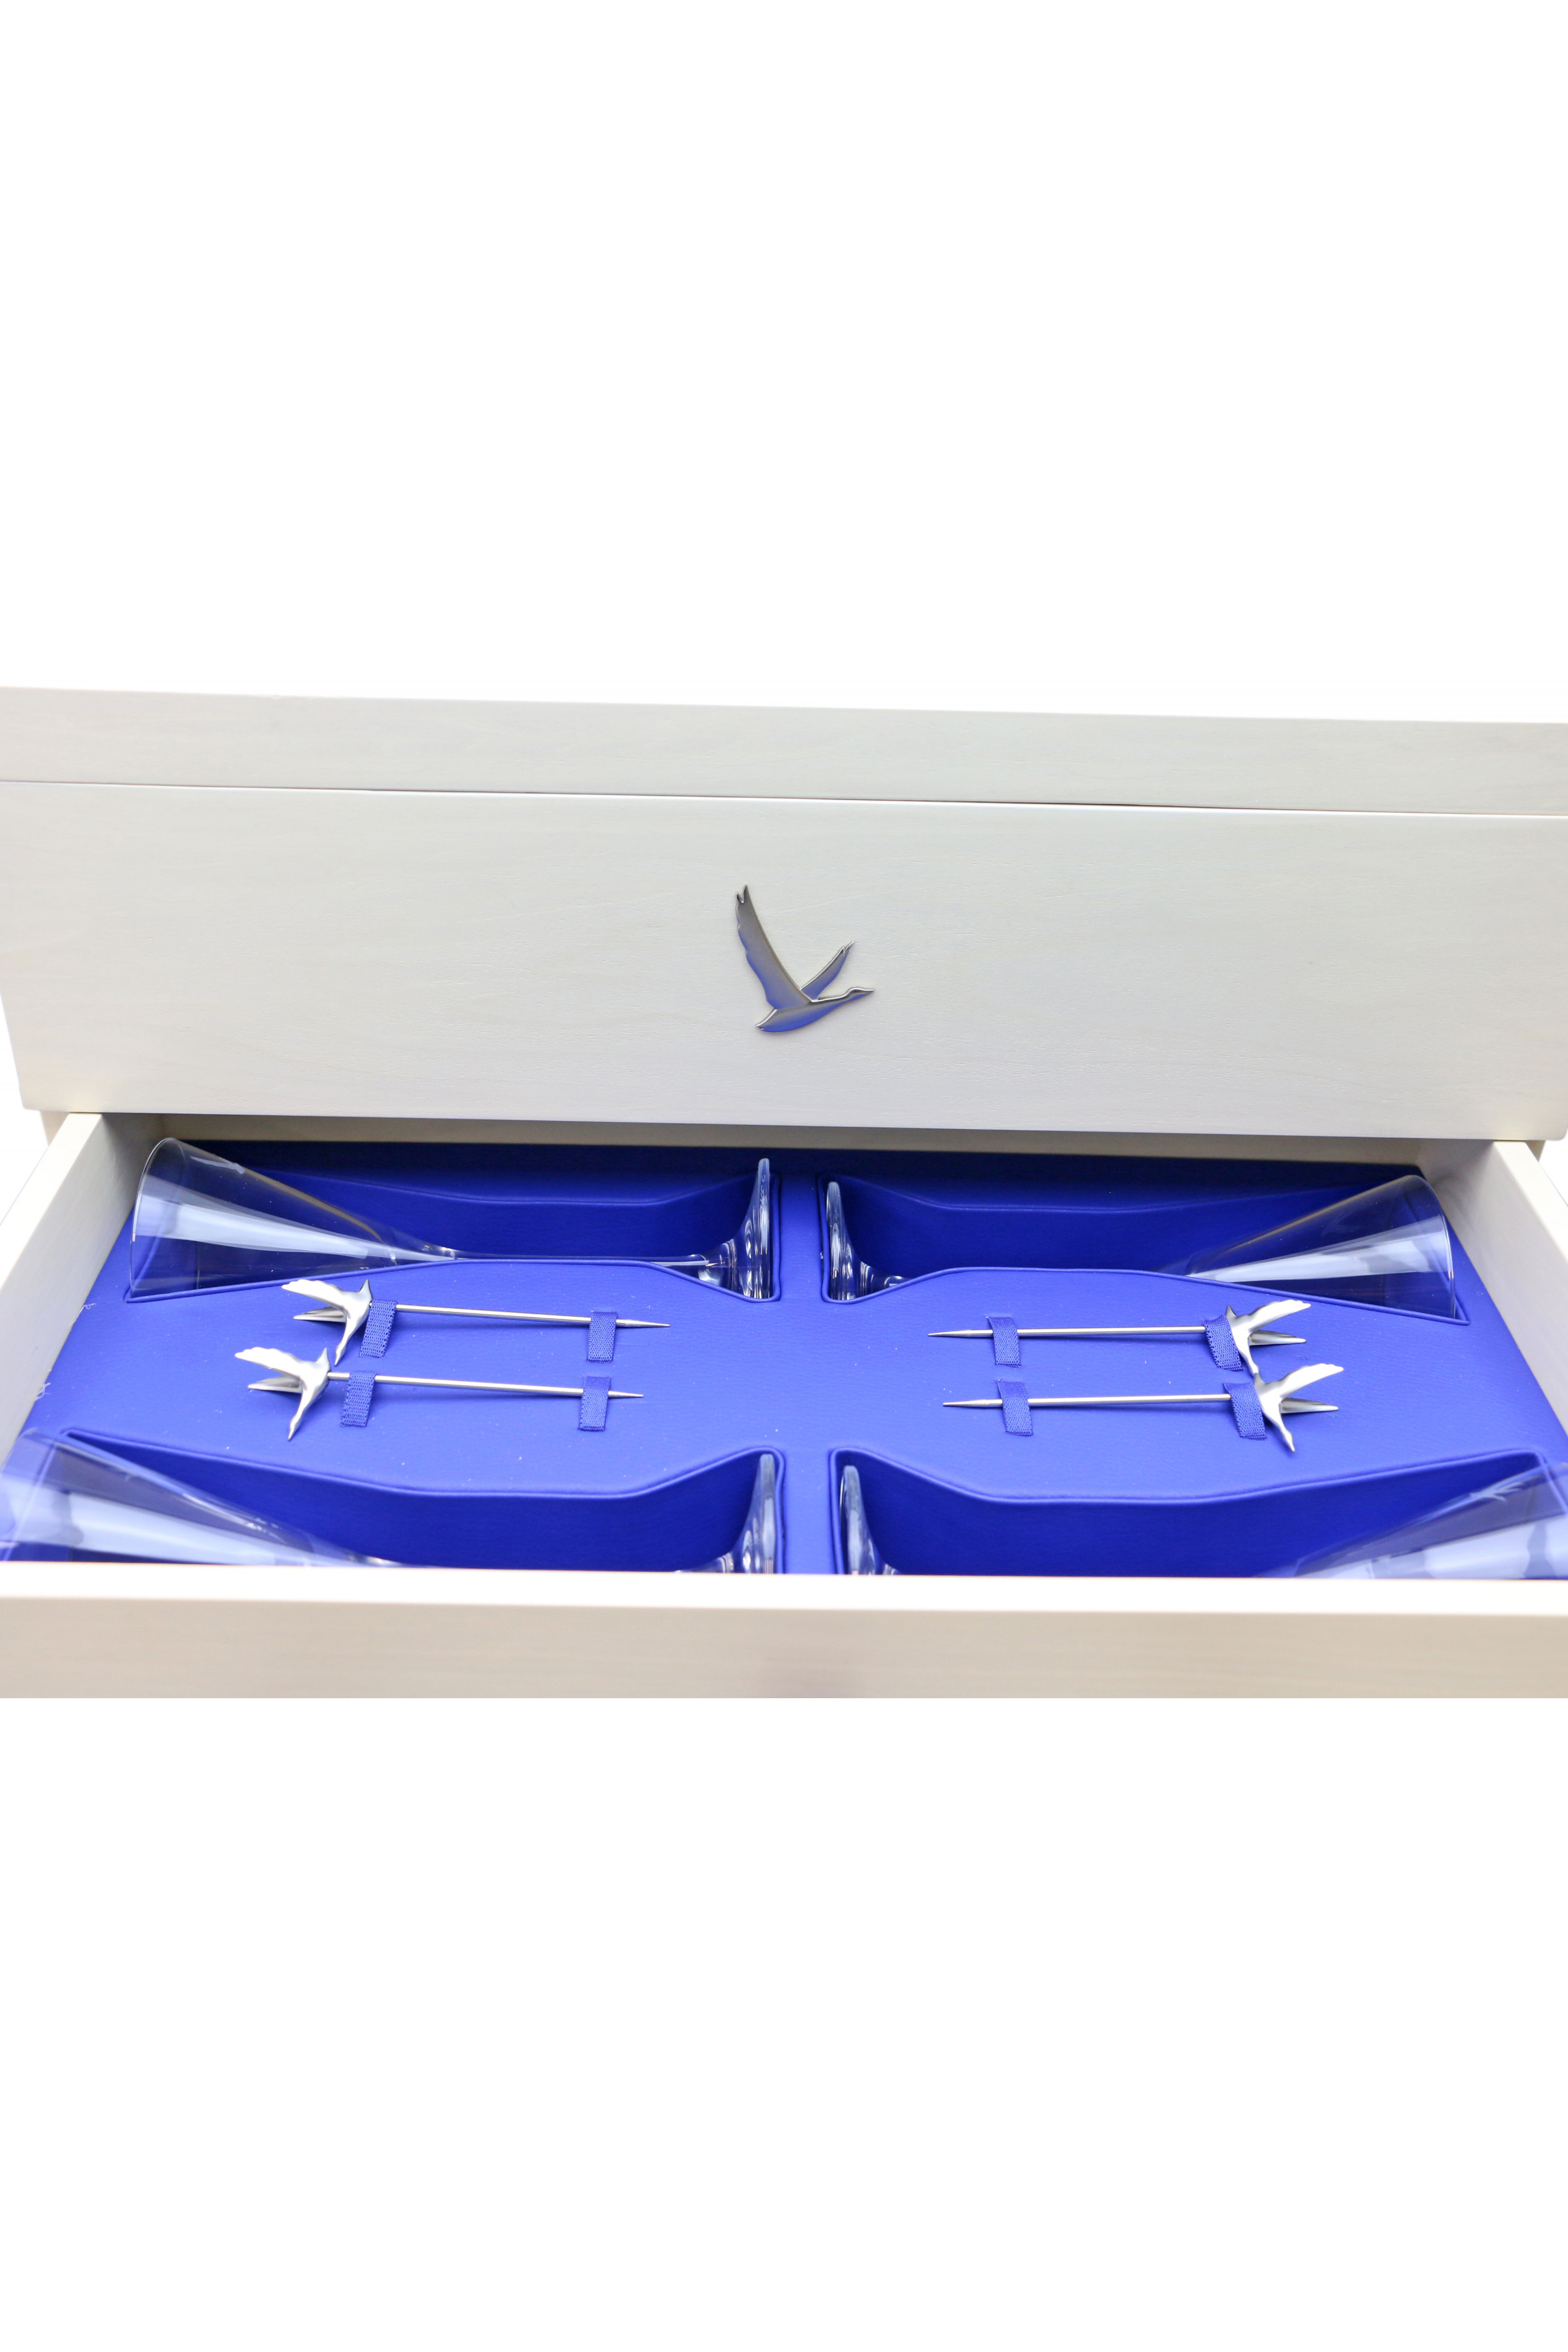 Grey goose Martini Set - Just Whisky Auctions